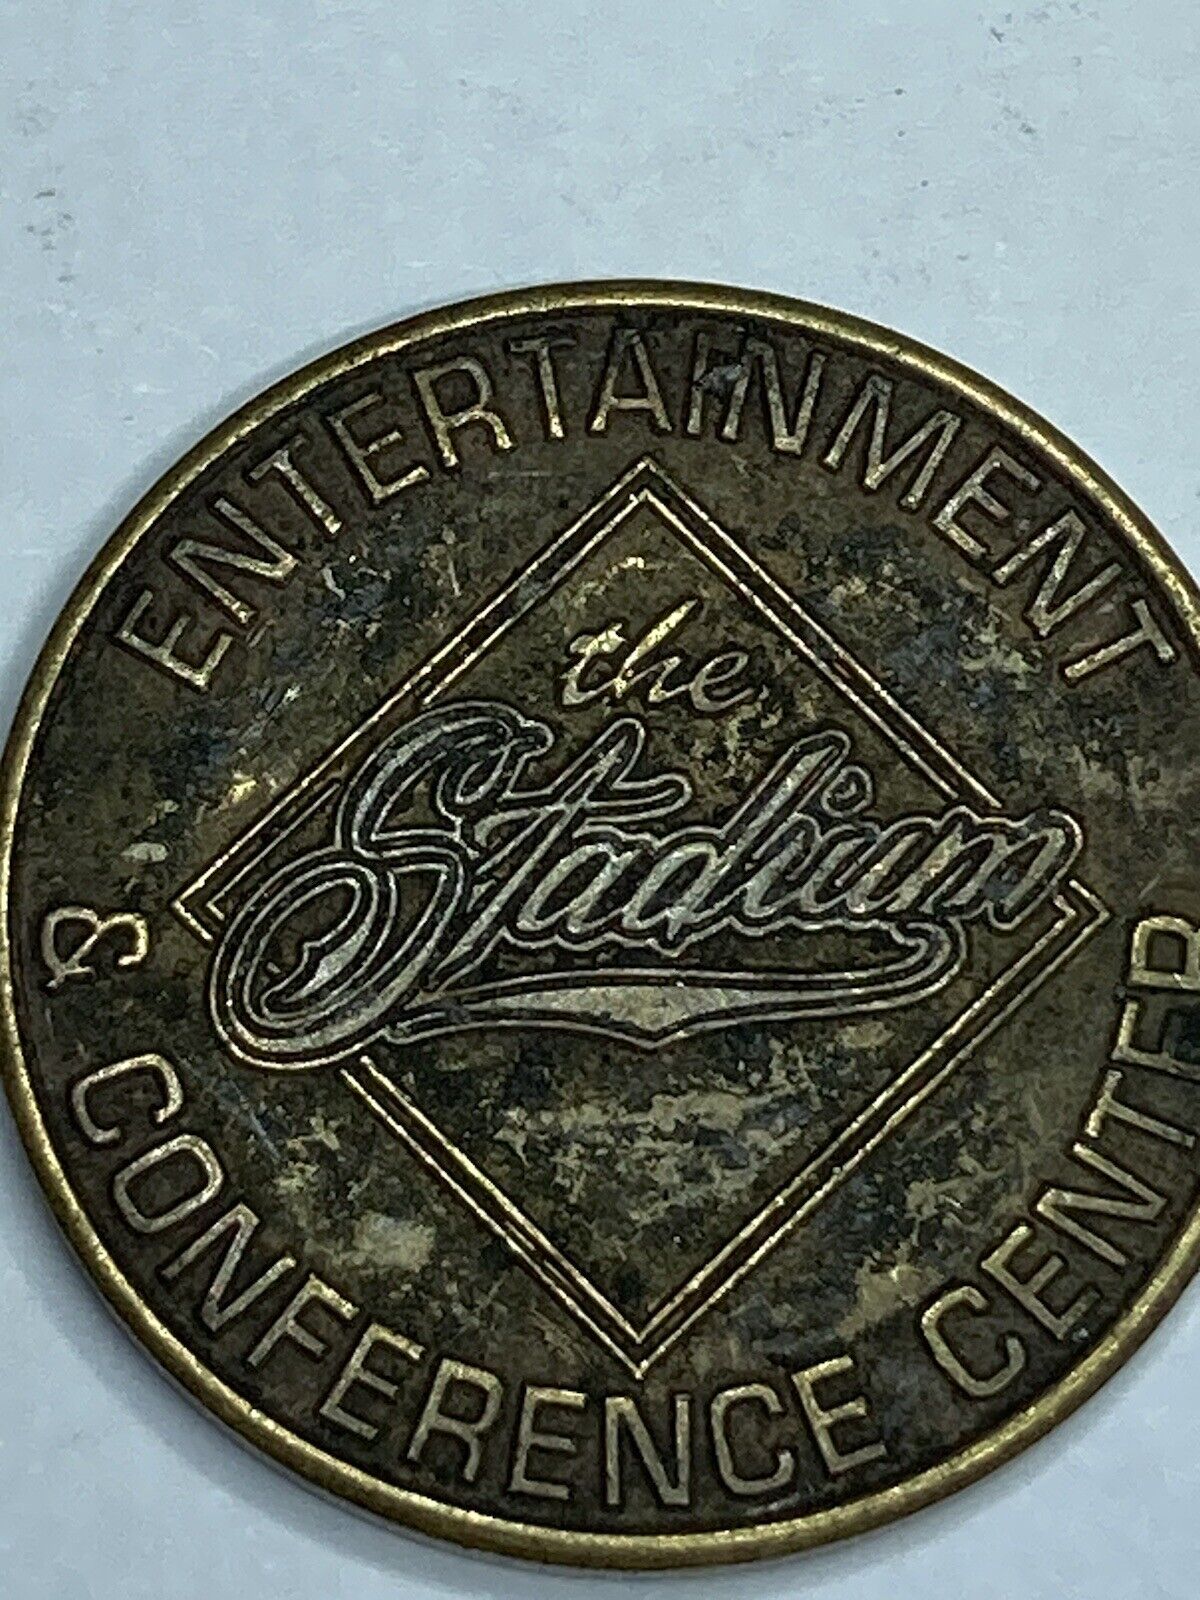 VINTAGE THE STADIUM ENTERTAINMENT & CONFERENCE CENTER ADVERTISING TOKEN - LOOK